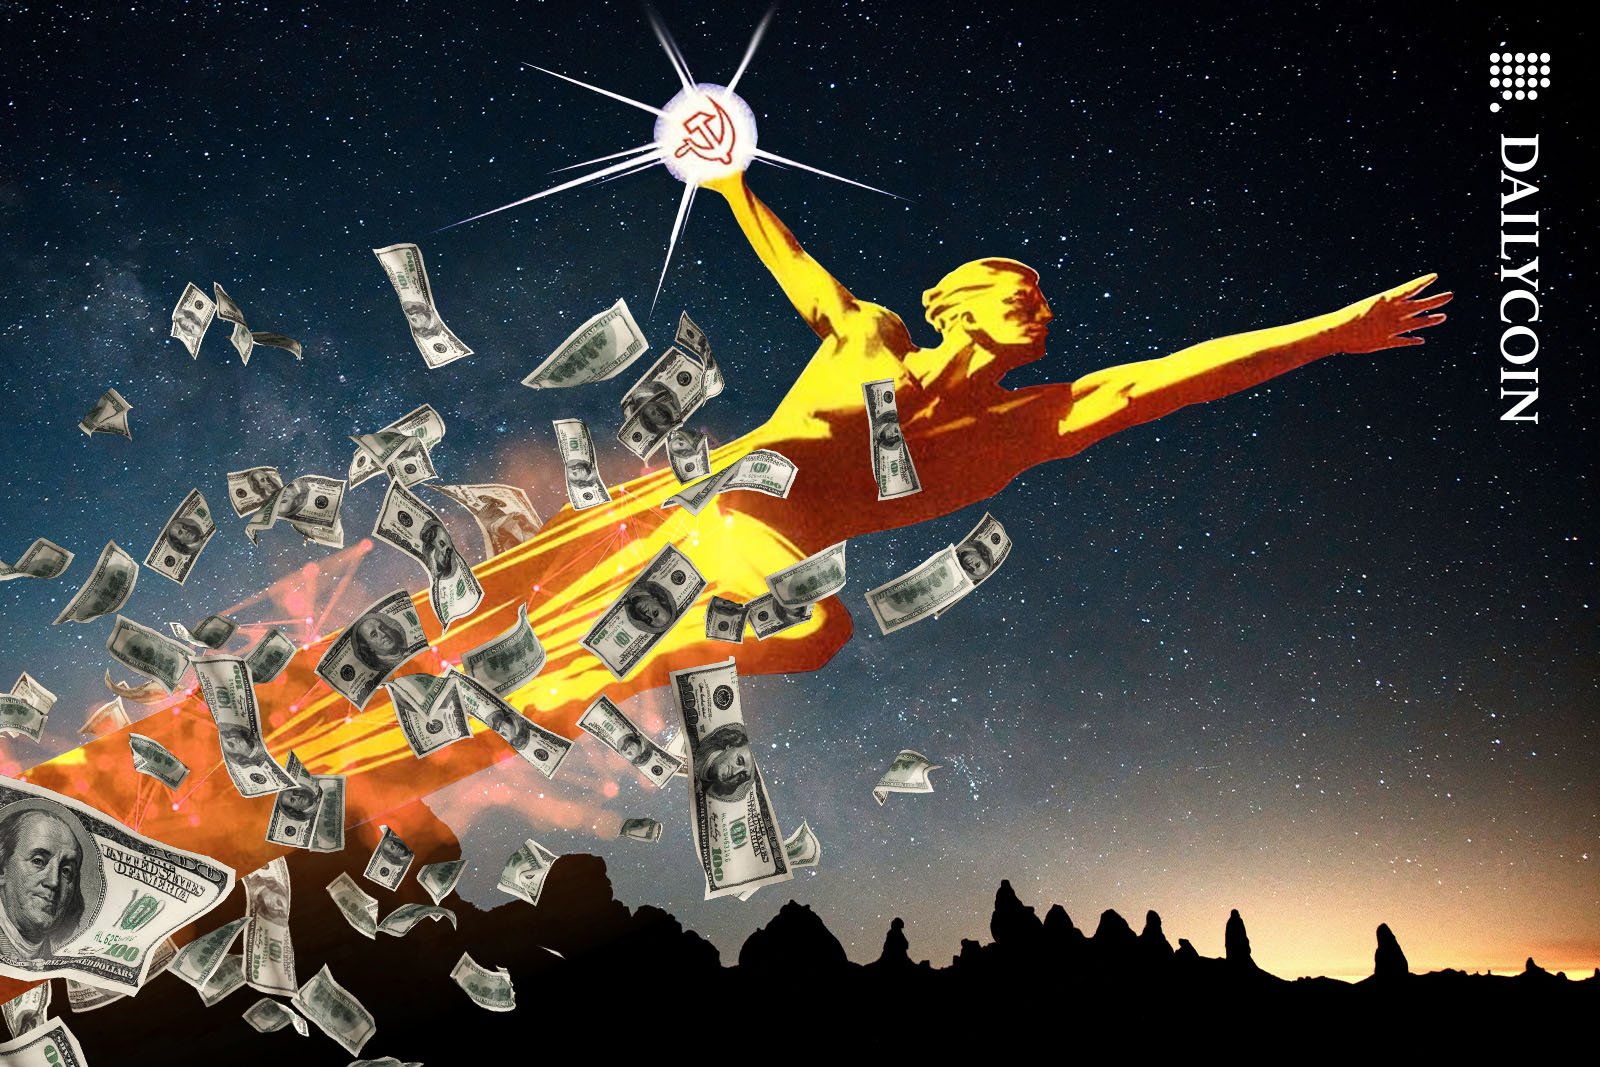 Soviet poster style figure soaring across tyhe sky leaving a trail of money behind.